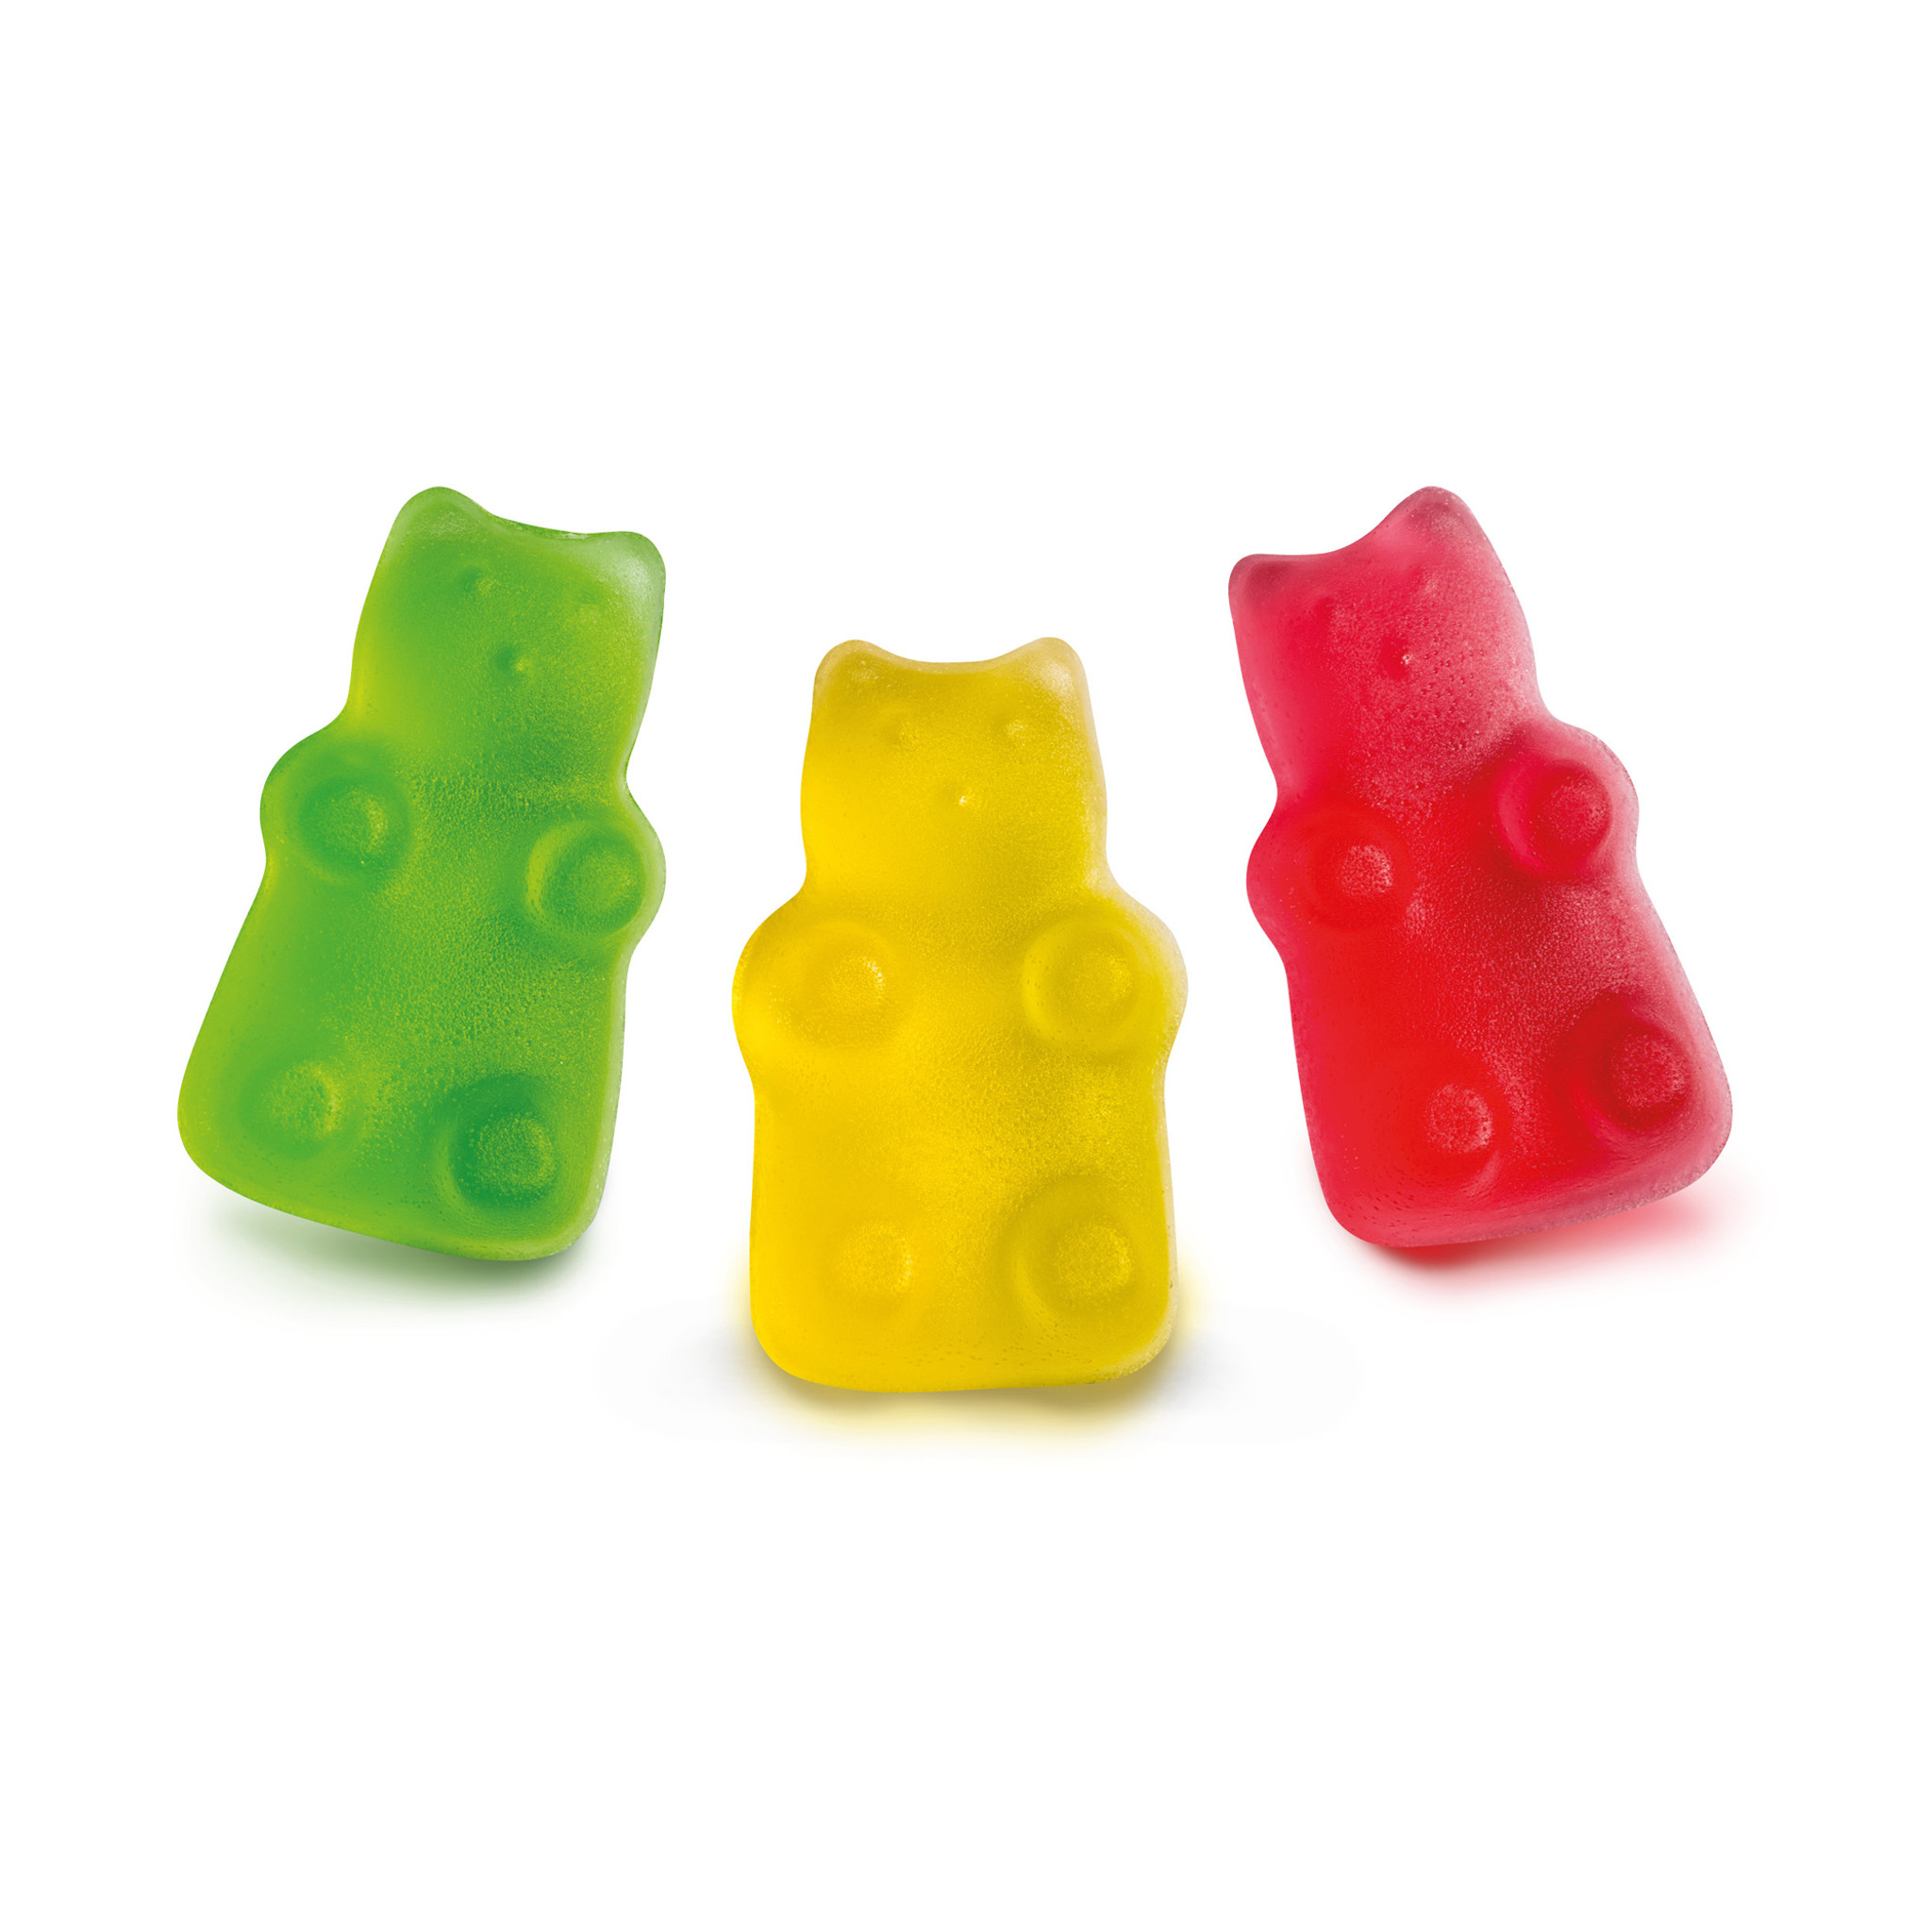 https://cdn11.bigcommerce.com/s-69ec9/images/stencil/2048x2048/products/1287/5251/Mr._Candy_Baker_Make_Your_Own_Gummy_Bears_Shapes__32911.1644014600.jpg?c=2